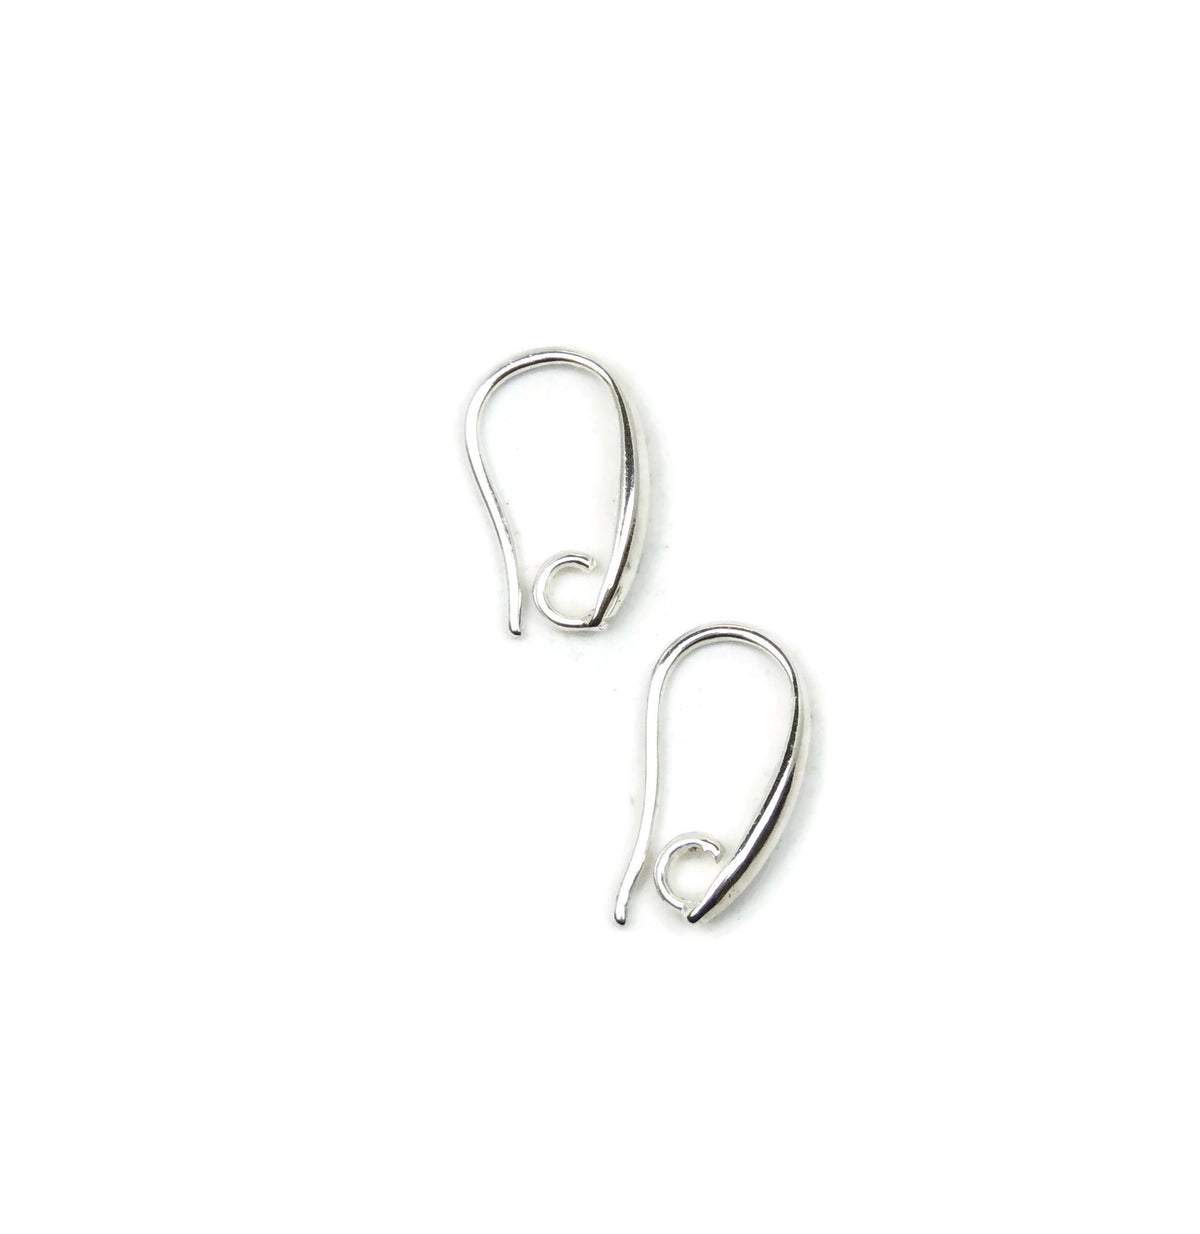 ALMA BEADS Silver Plated Lever Backs 14 mm 10 pcs